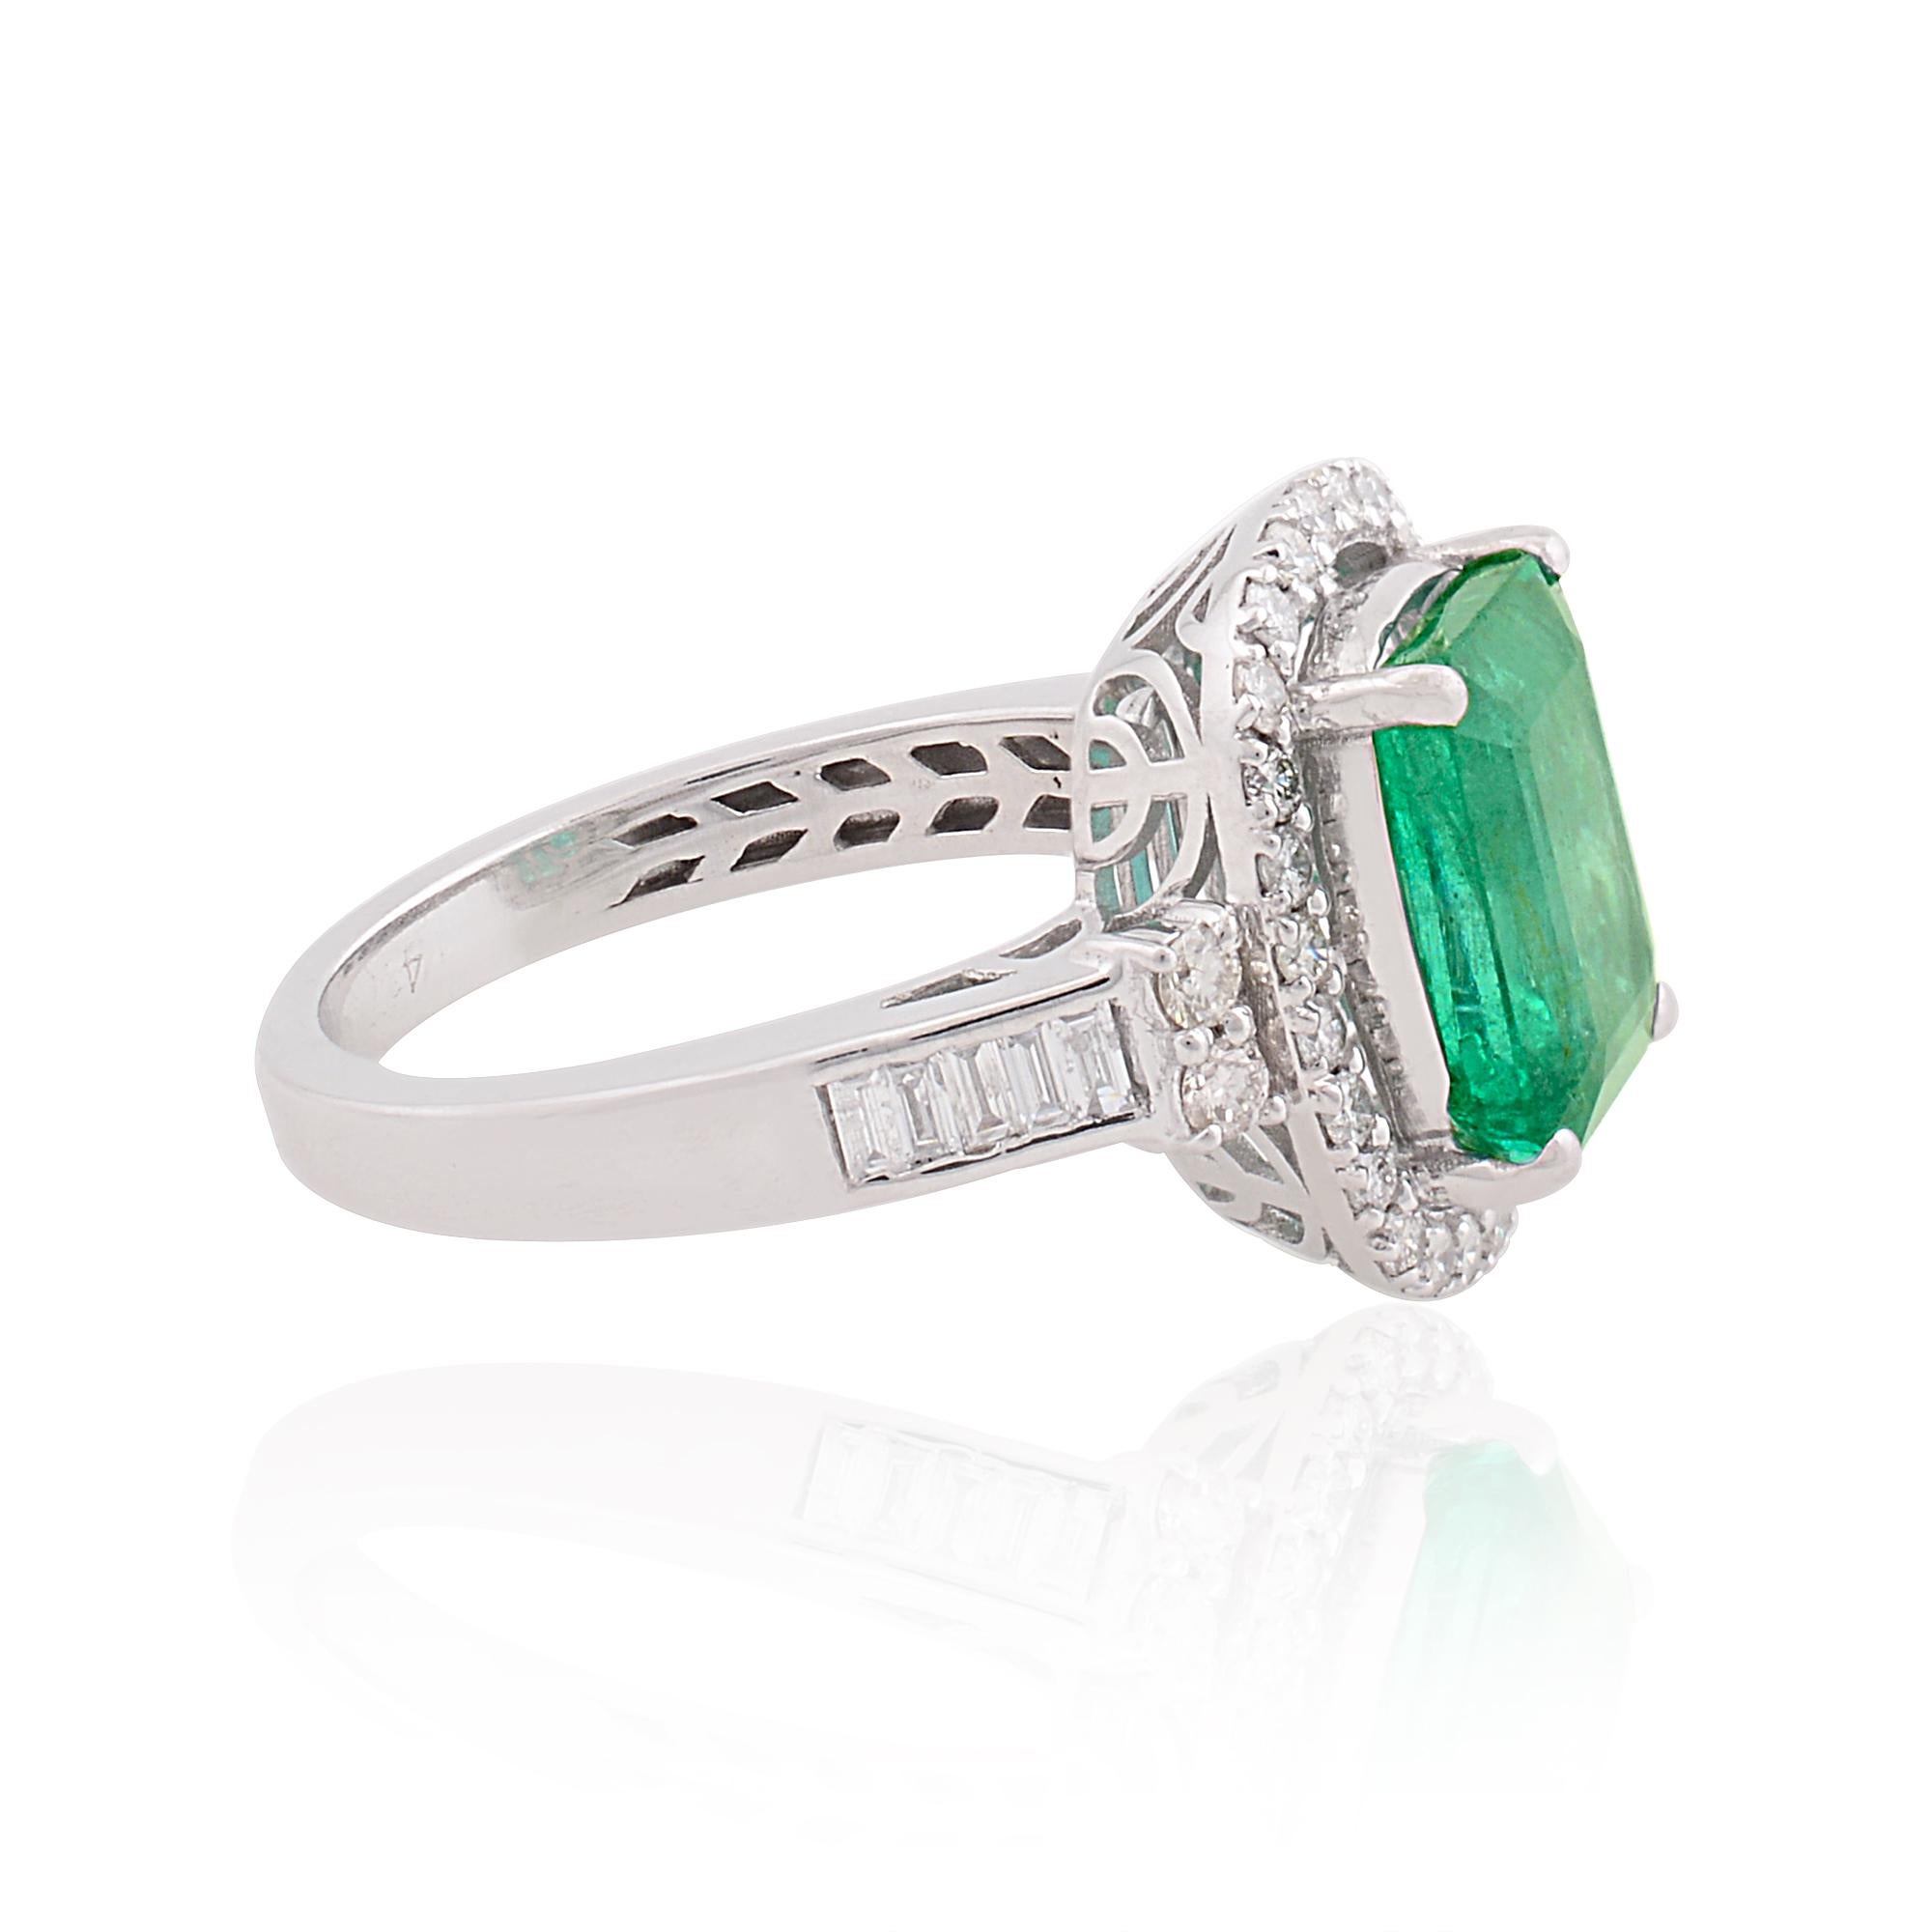 Item Code :- STR-2033
Gross Wt. :- 4.66 gm
10k Solid White Gold Wt. :- 3.92 gm
Natural Diamond Wt. :- 0.54 Ct. ( AVERAGE DIAMOND CLARITY SI1-SI2 & COLOR H-I )
Zambian Emerald Wt. :- 3.16 Ct.
Ring Size :- 7 US

✦ Import Duties, Taxes and Custom